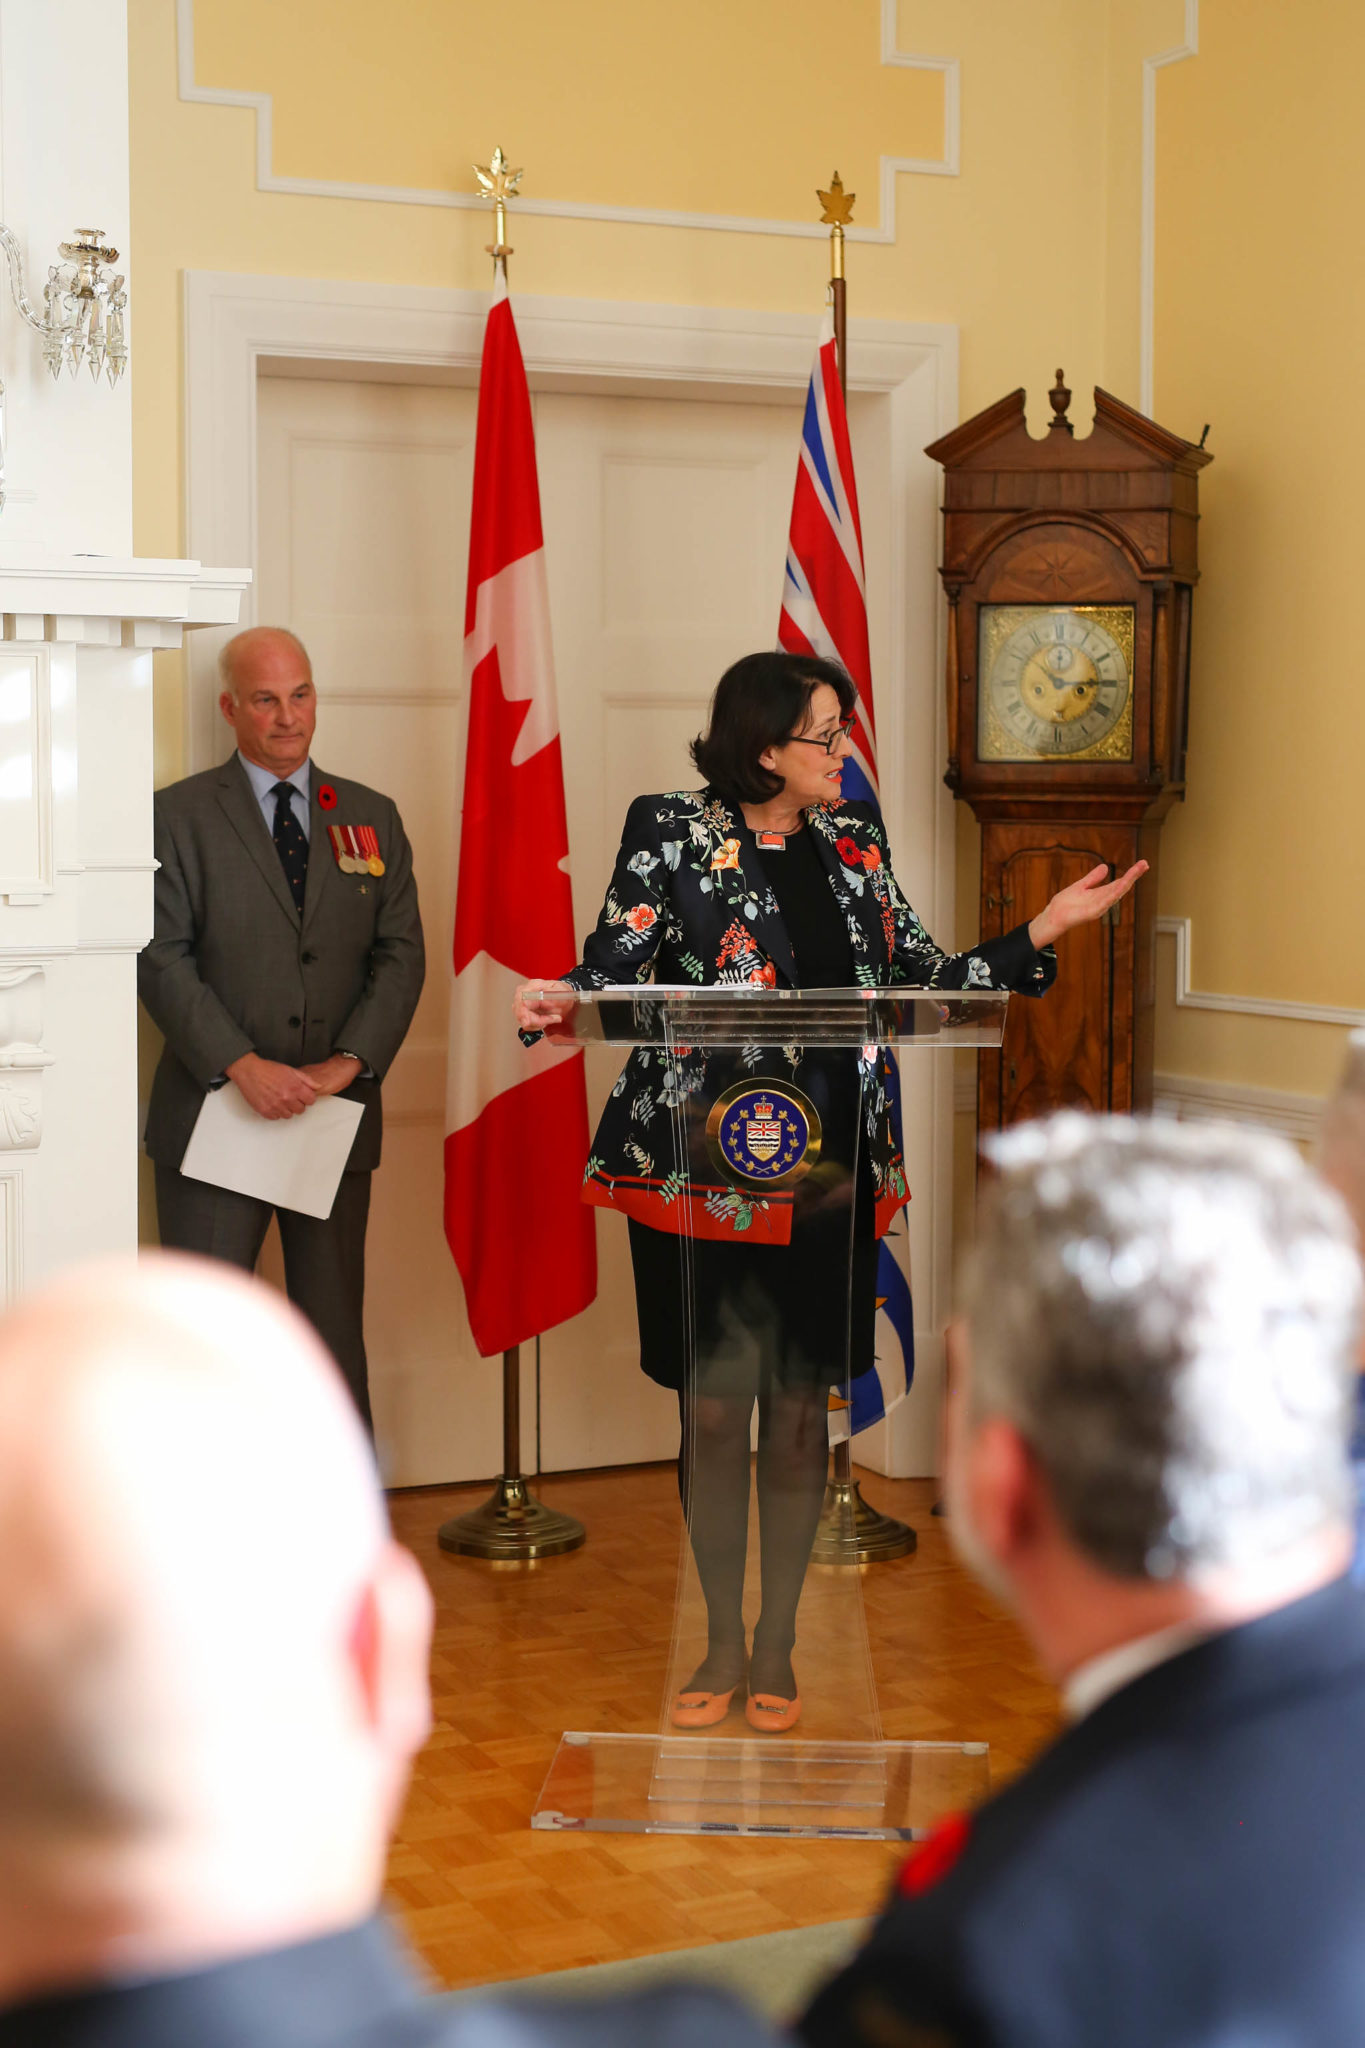 1. The Honourable Janet Austin, Lieutenant Governor of B.C. welcomed guests to the ceremony.